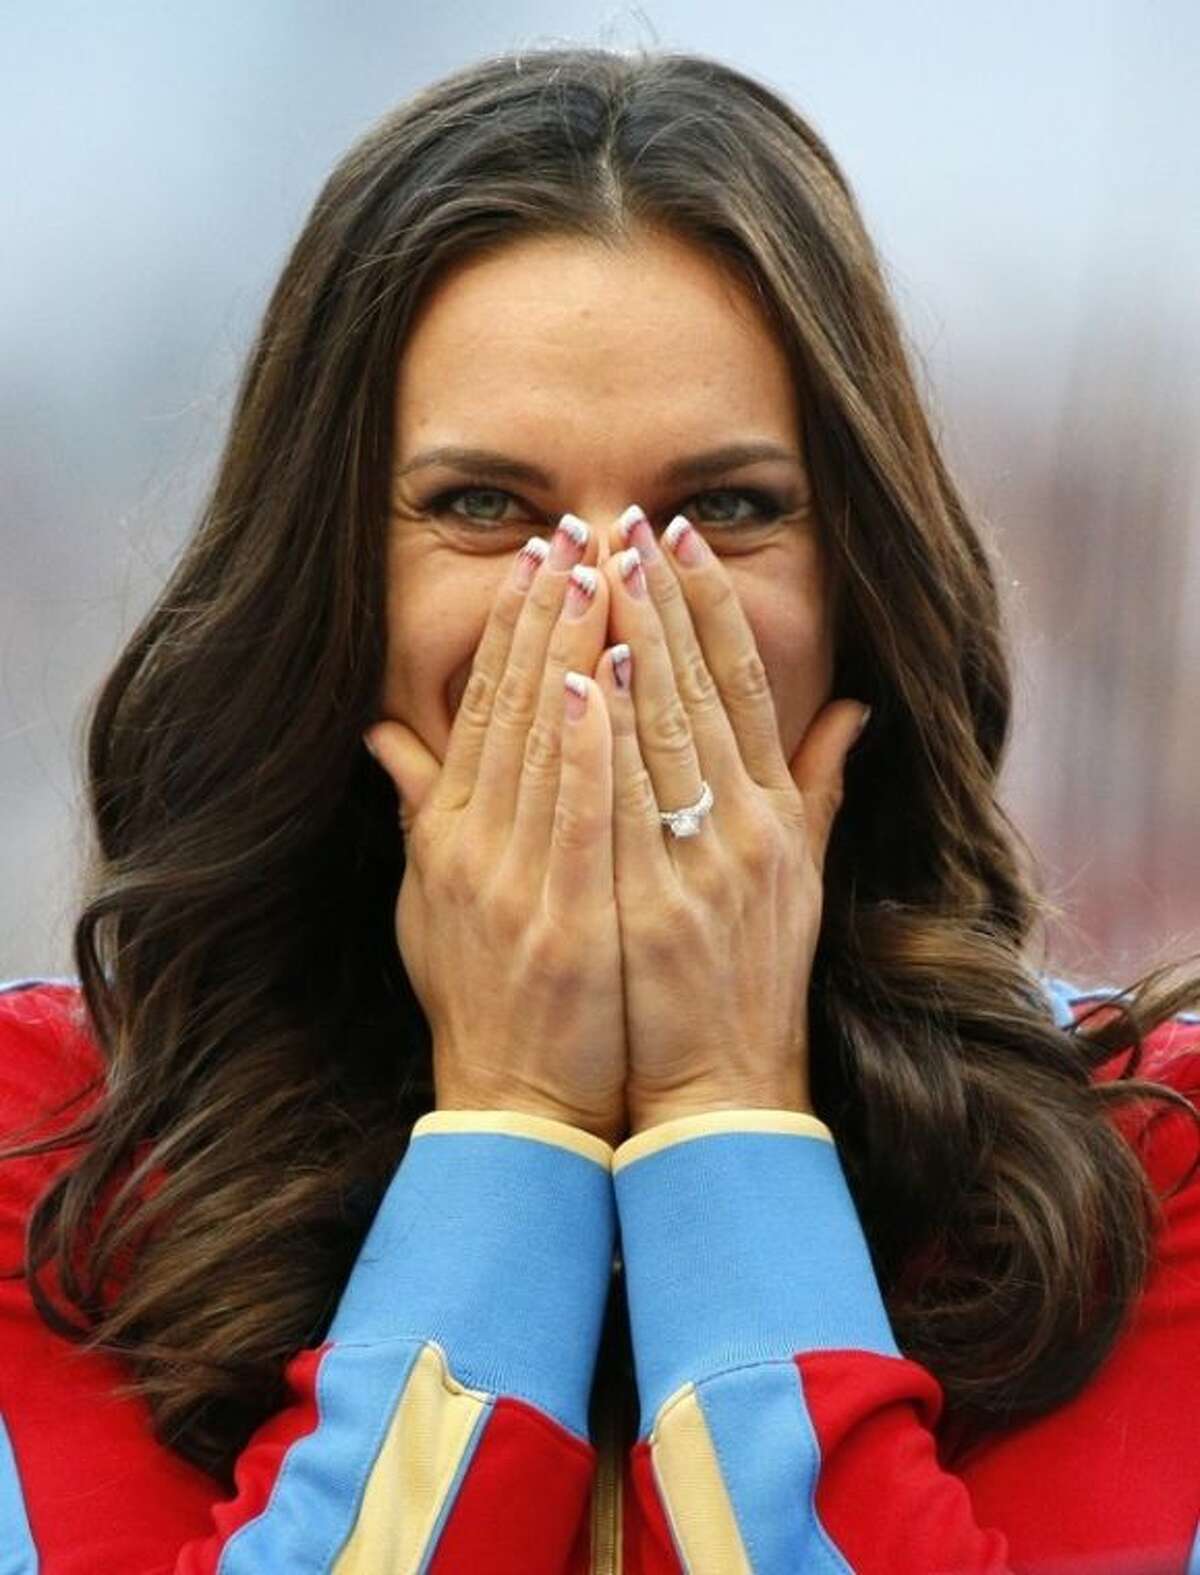 Russia's Yelena Isinbayeva reacts as she stands on the podium after receiving the gold medal in the women's pole vault during the medal ceremony at the World Athletics Championships in the Luzhniki stadium in Moscow, Russia, Thursday, Aug. 15, 2013. (AP Photo/Alexander Zemlianichenko)